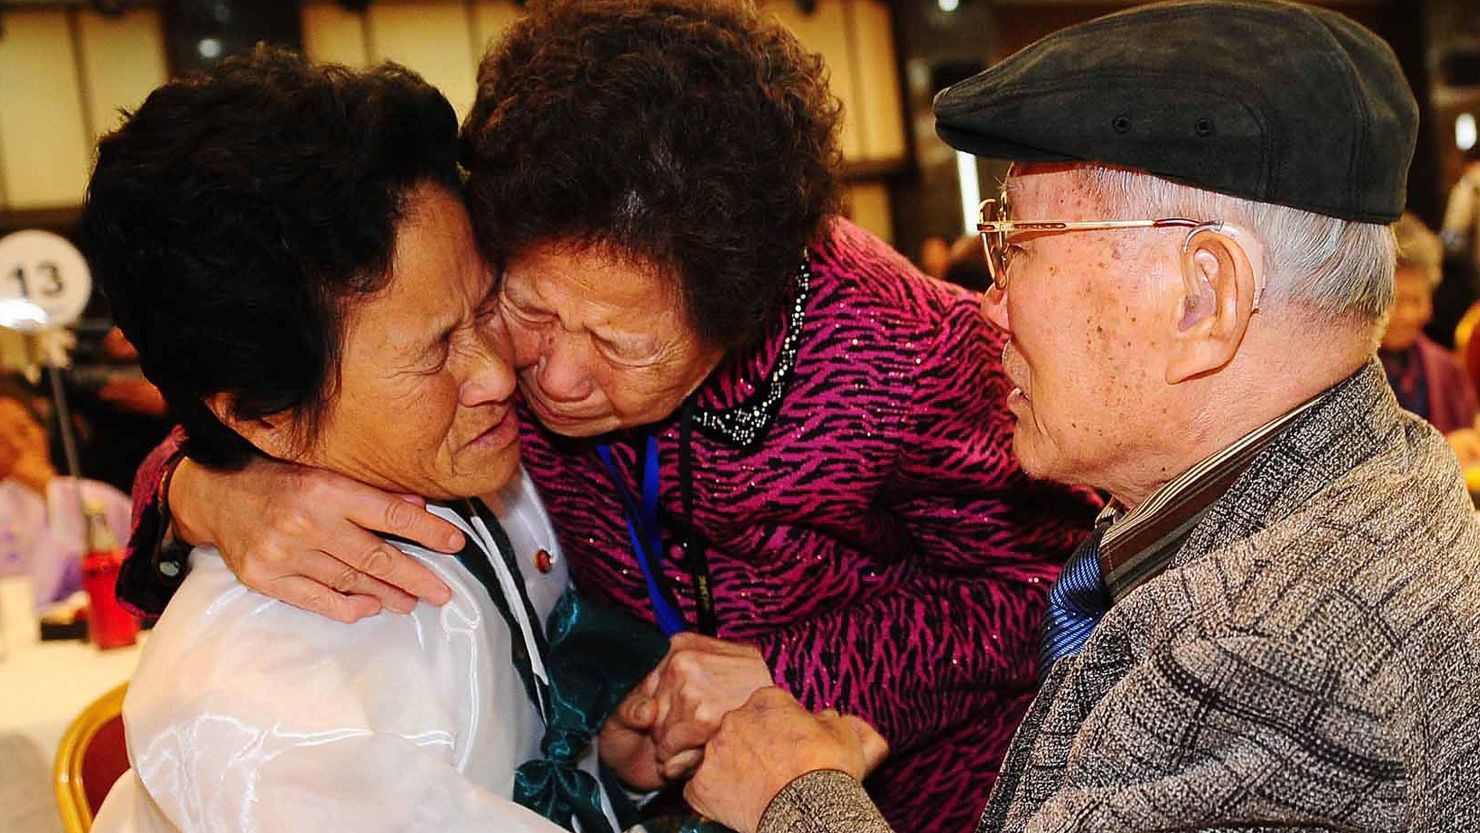 Relatives weep during a reunion of families divided by the Korean War, during this 2010 event.